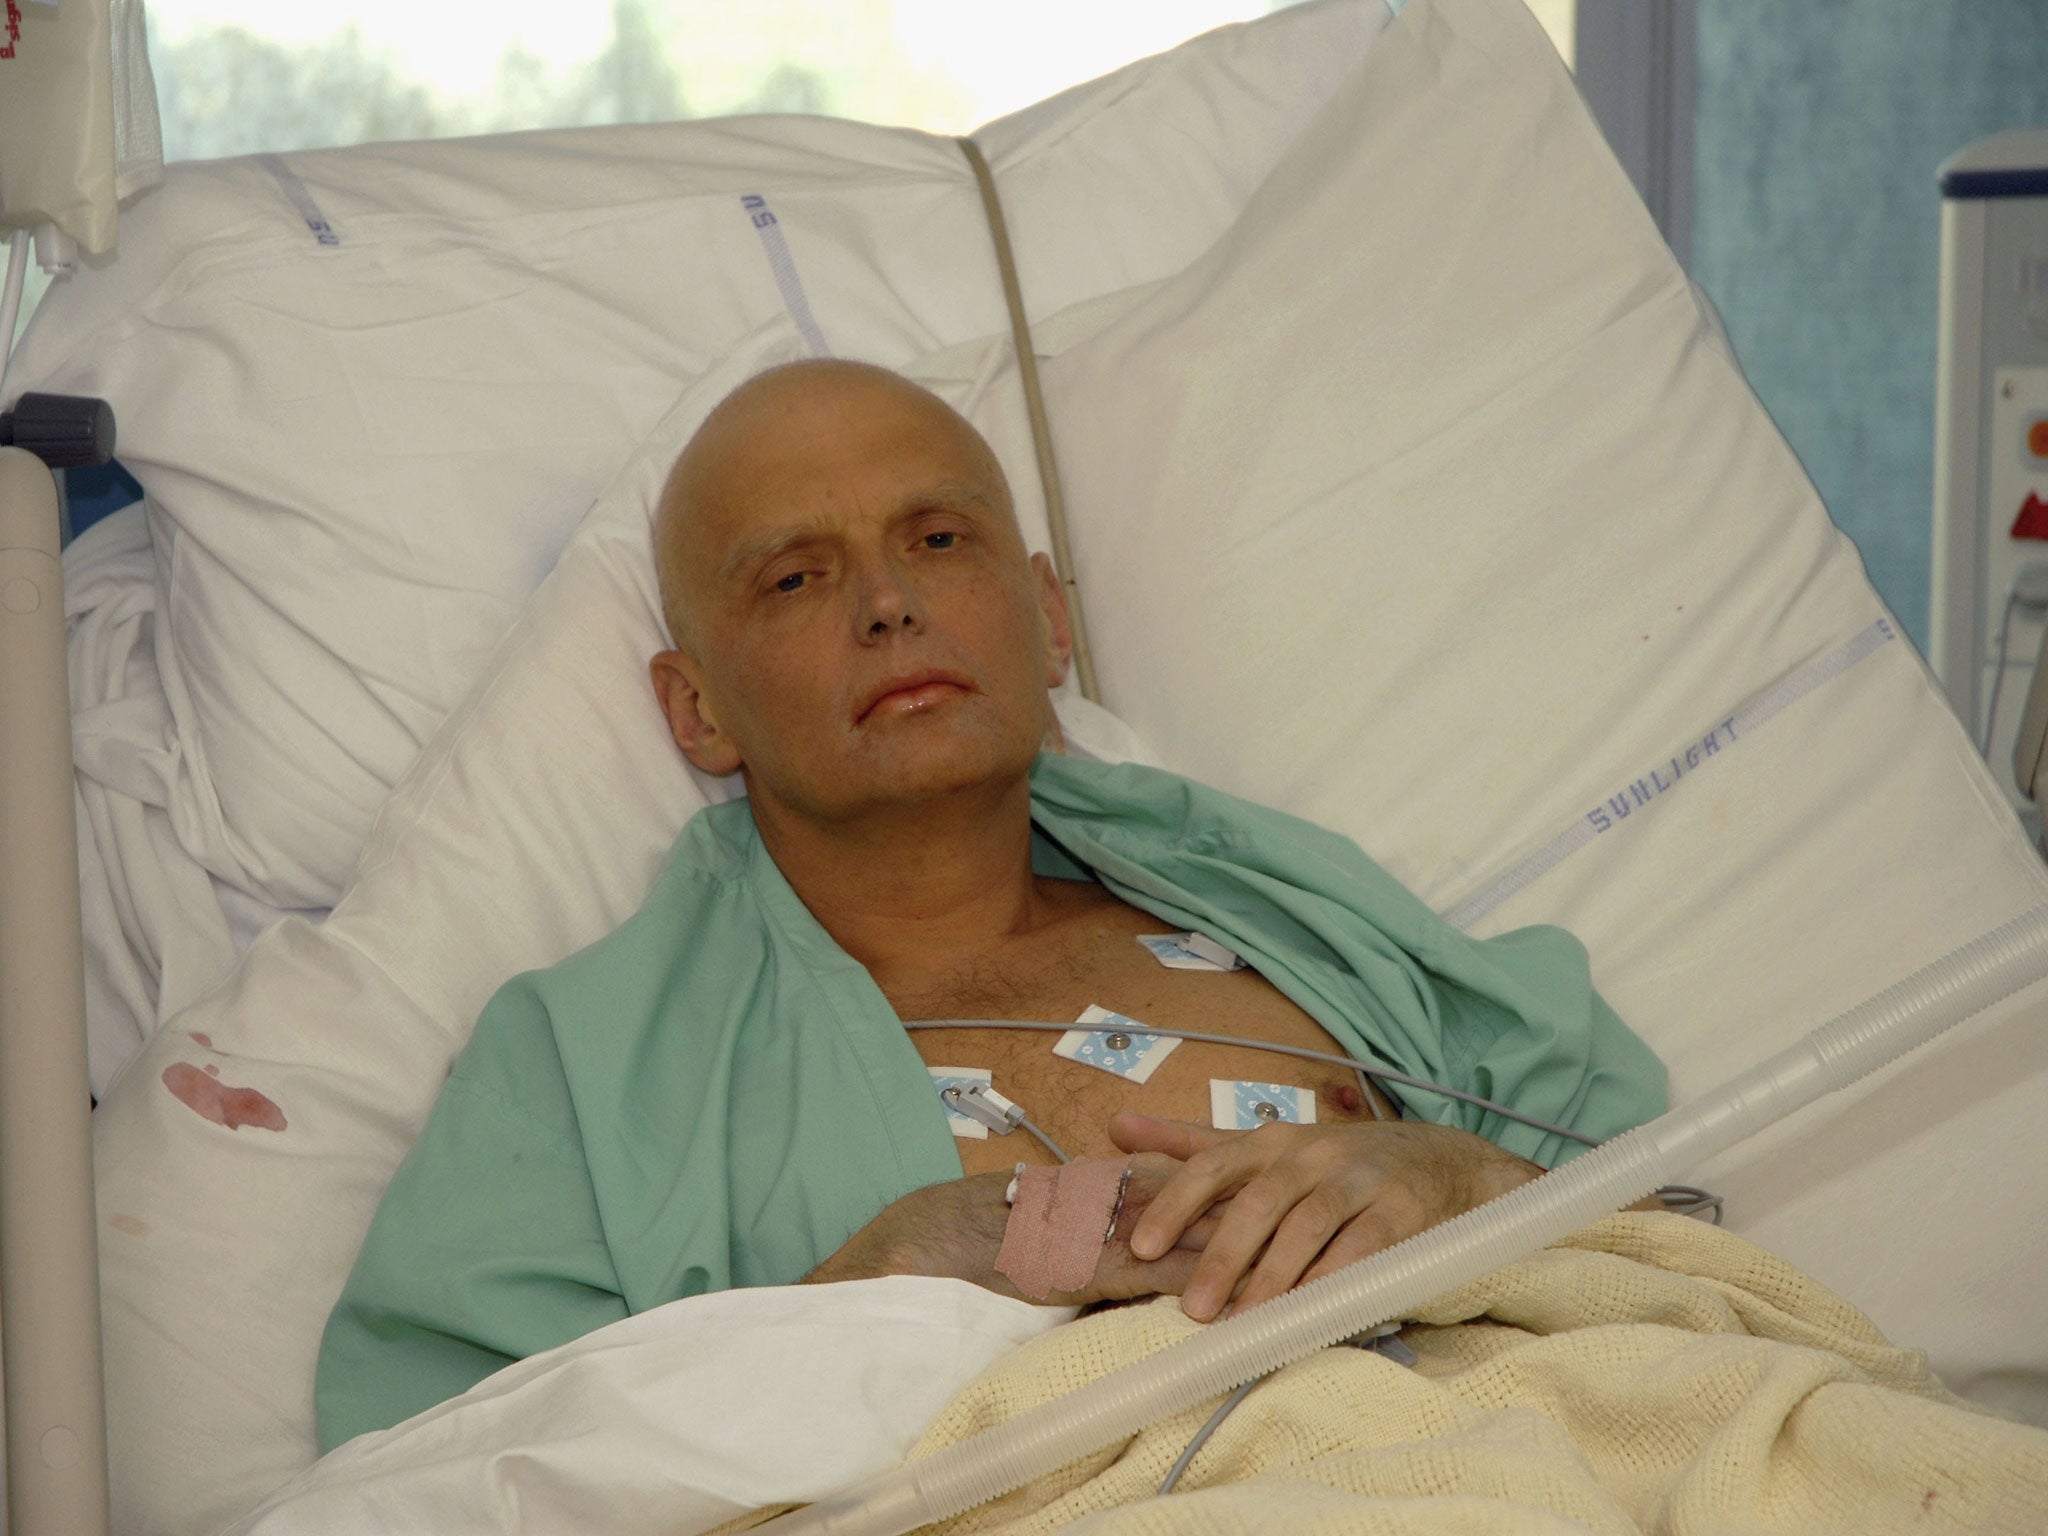 Alexander Litvinenko pictured at the Intensive Care Unit of University College Hospital on 20 November 2006